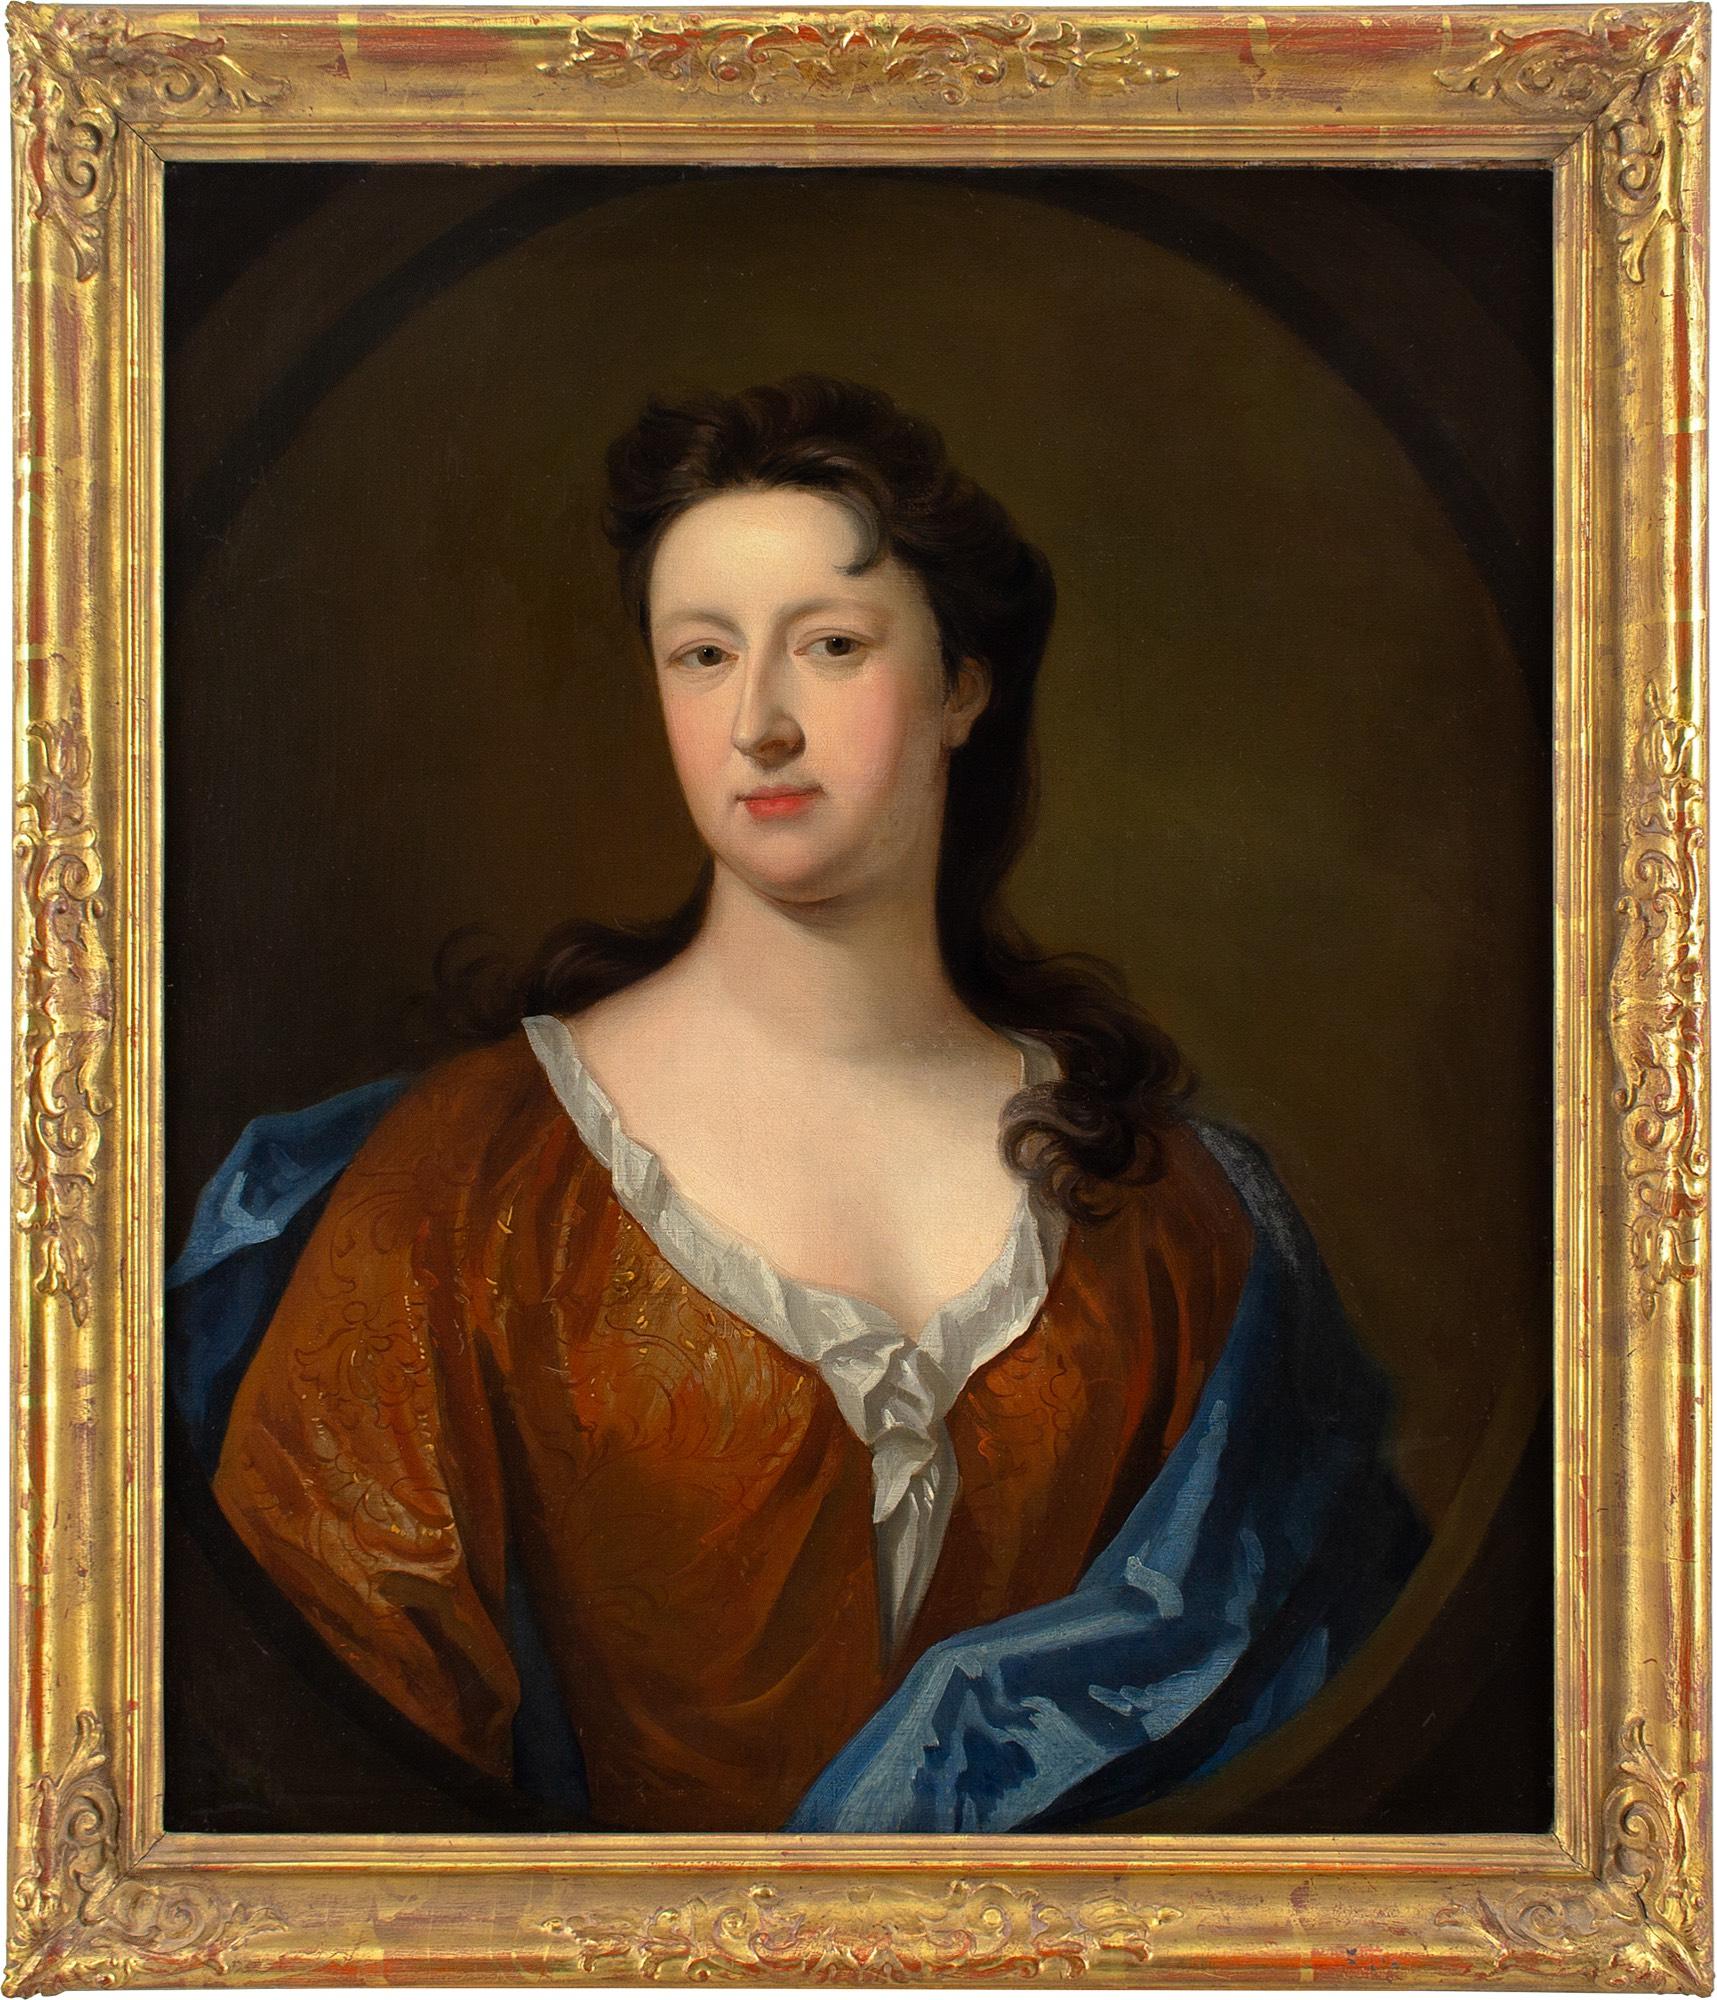 Unknown Portrait Painting - Early 18th-Century English School, Portrait Of A Lady In A Russet Dress